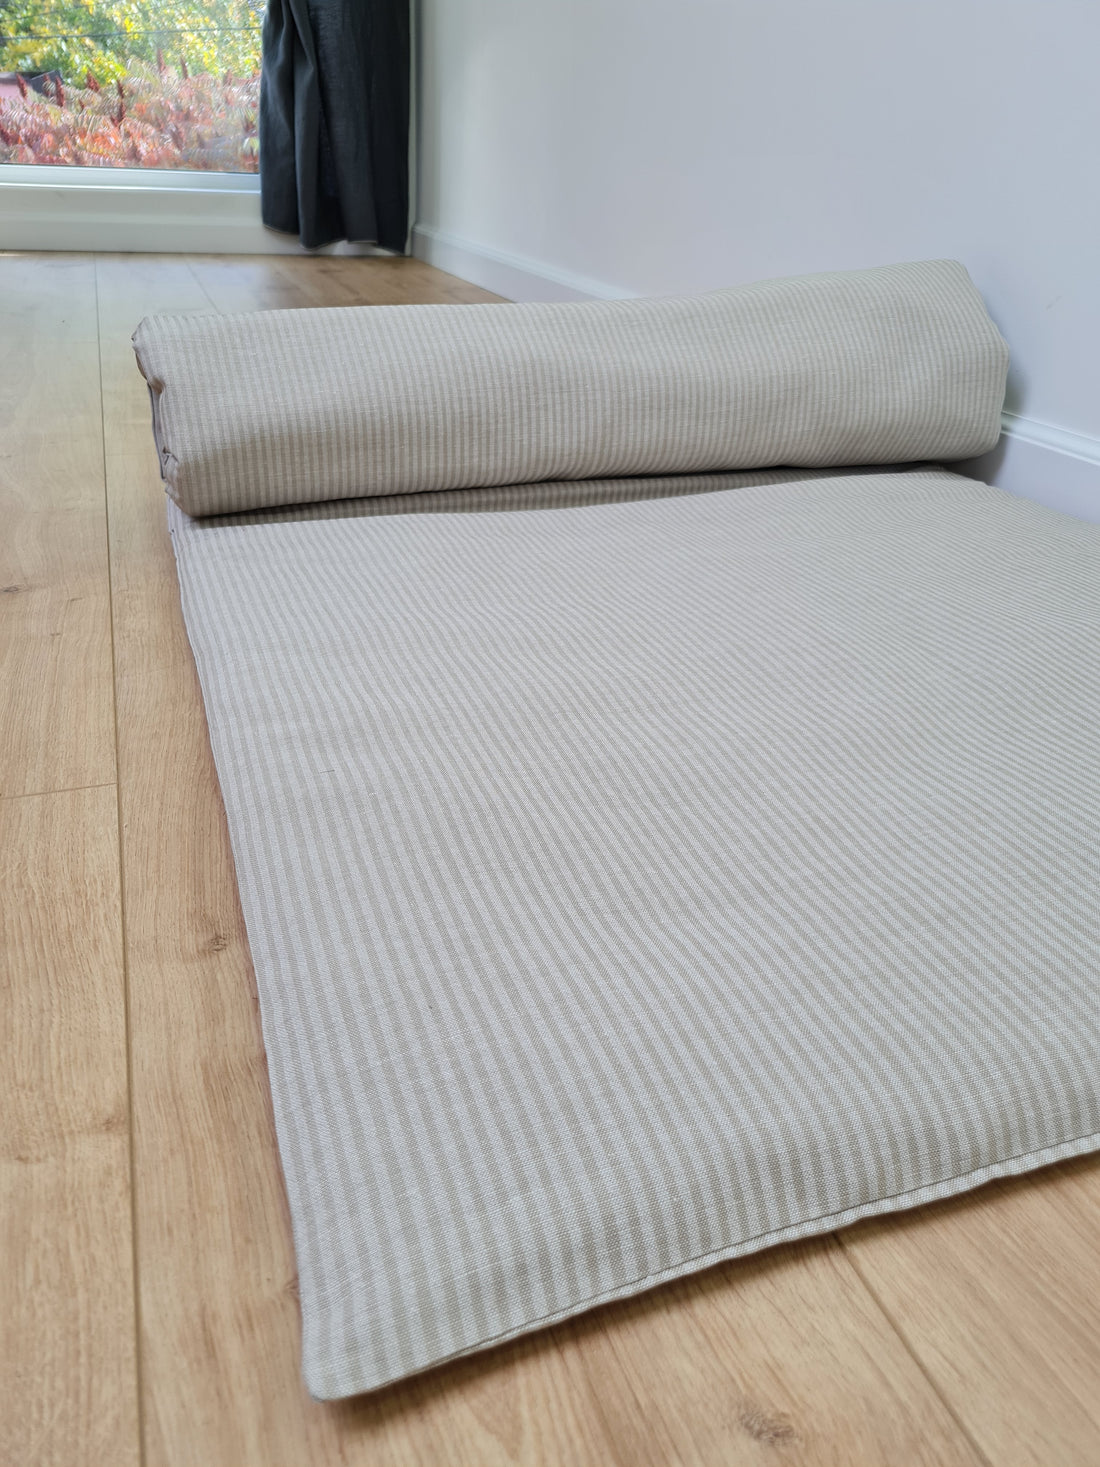 Hemp Linen Sofa Protector Covers in Stripes for Dogs Cats Machine